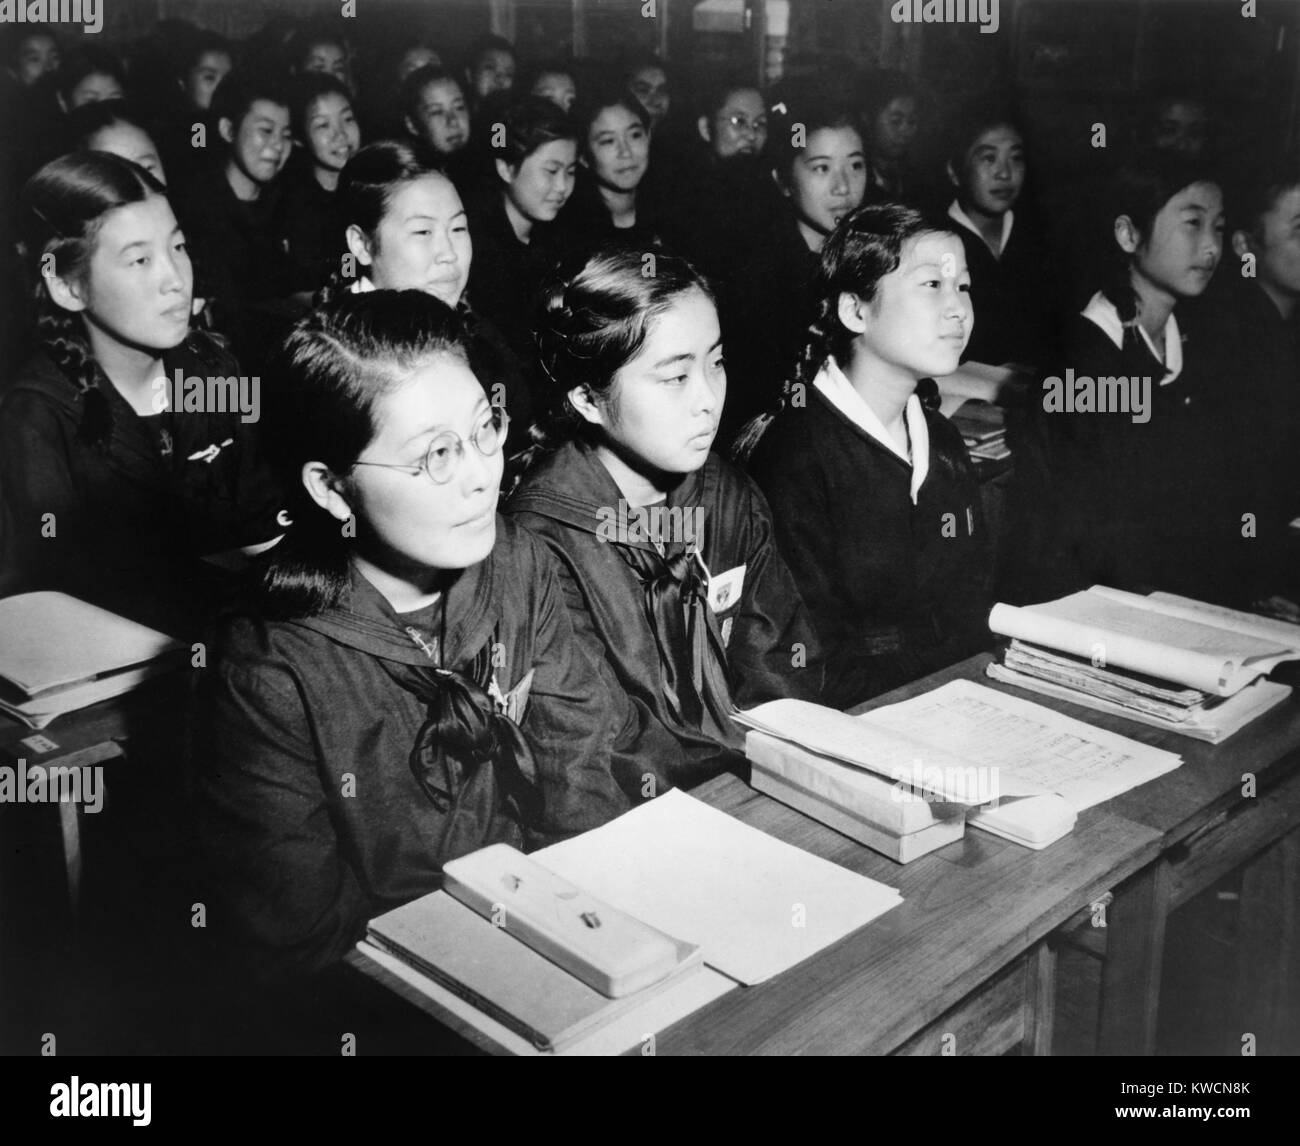 Japanese girls seated at desks in newly rebuilt Catholic school in Tokyo, Japan. The teenagers helped rebuild the school. Oct. 31, 1946. - (BSLOC 2014 15 131) Stock Photo